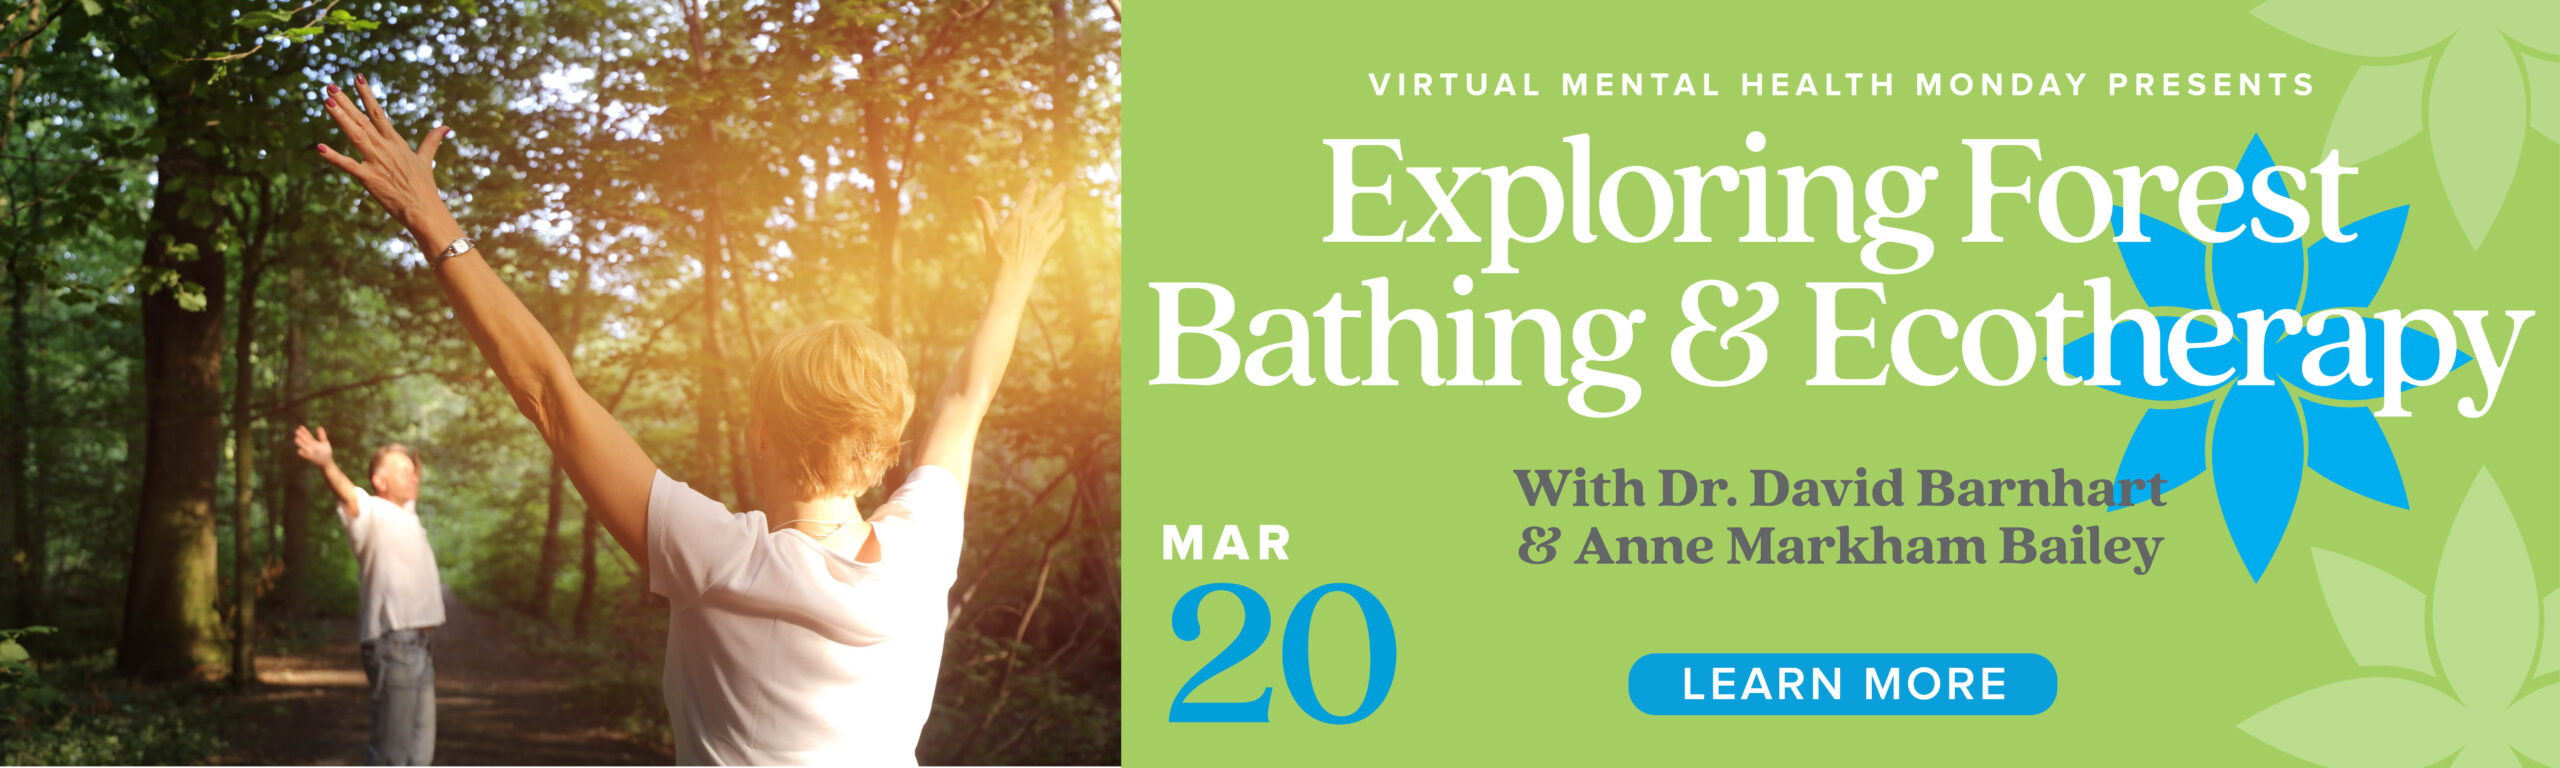 Register today for UAB Arts in Medicine's next Virtual Mental Health Monday, March 20!